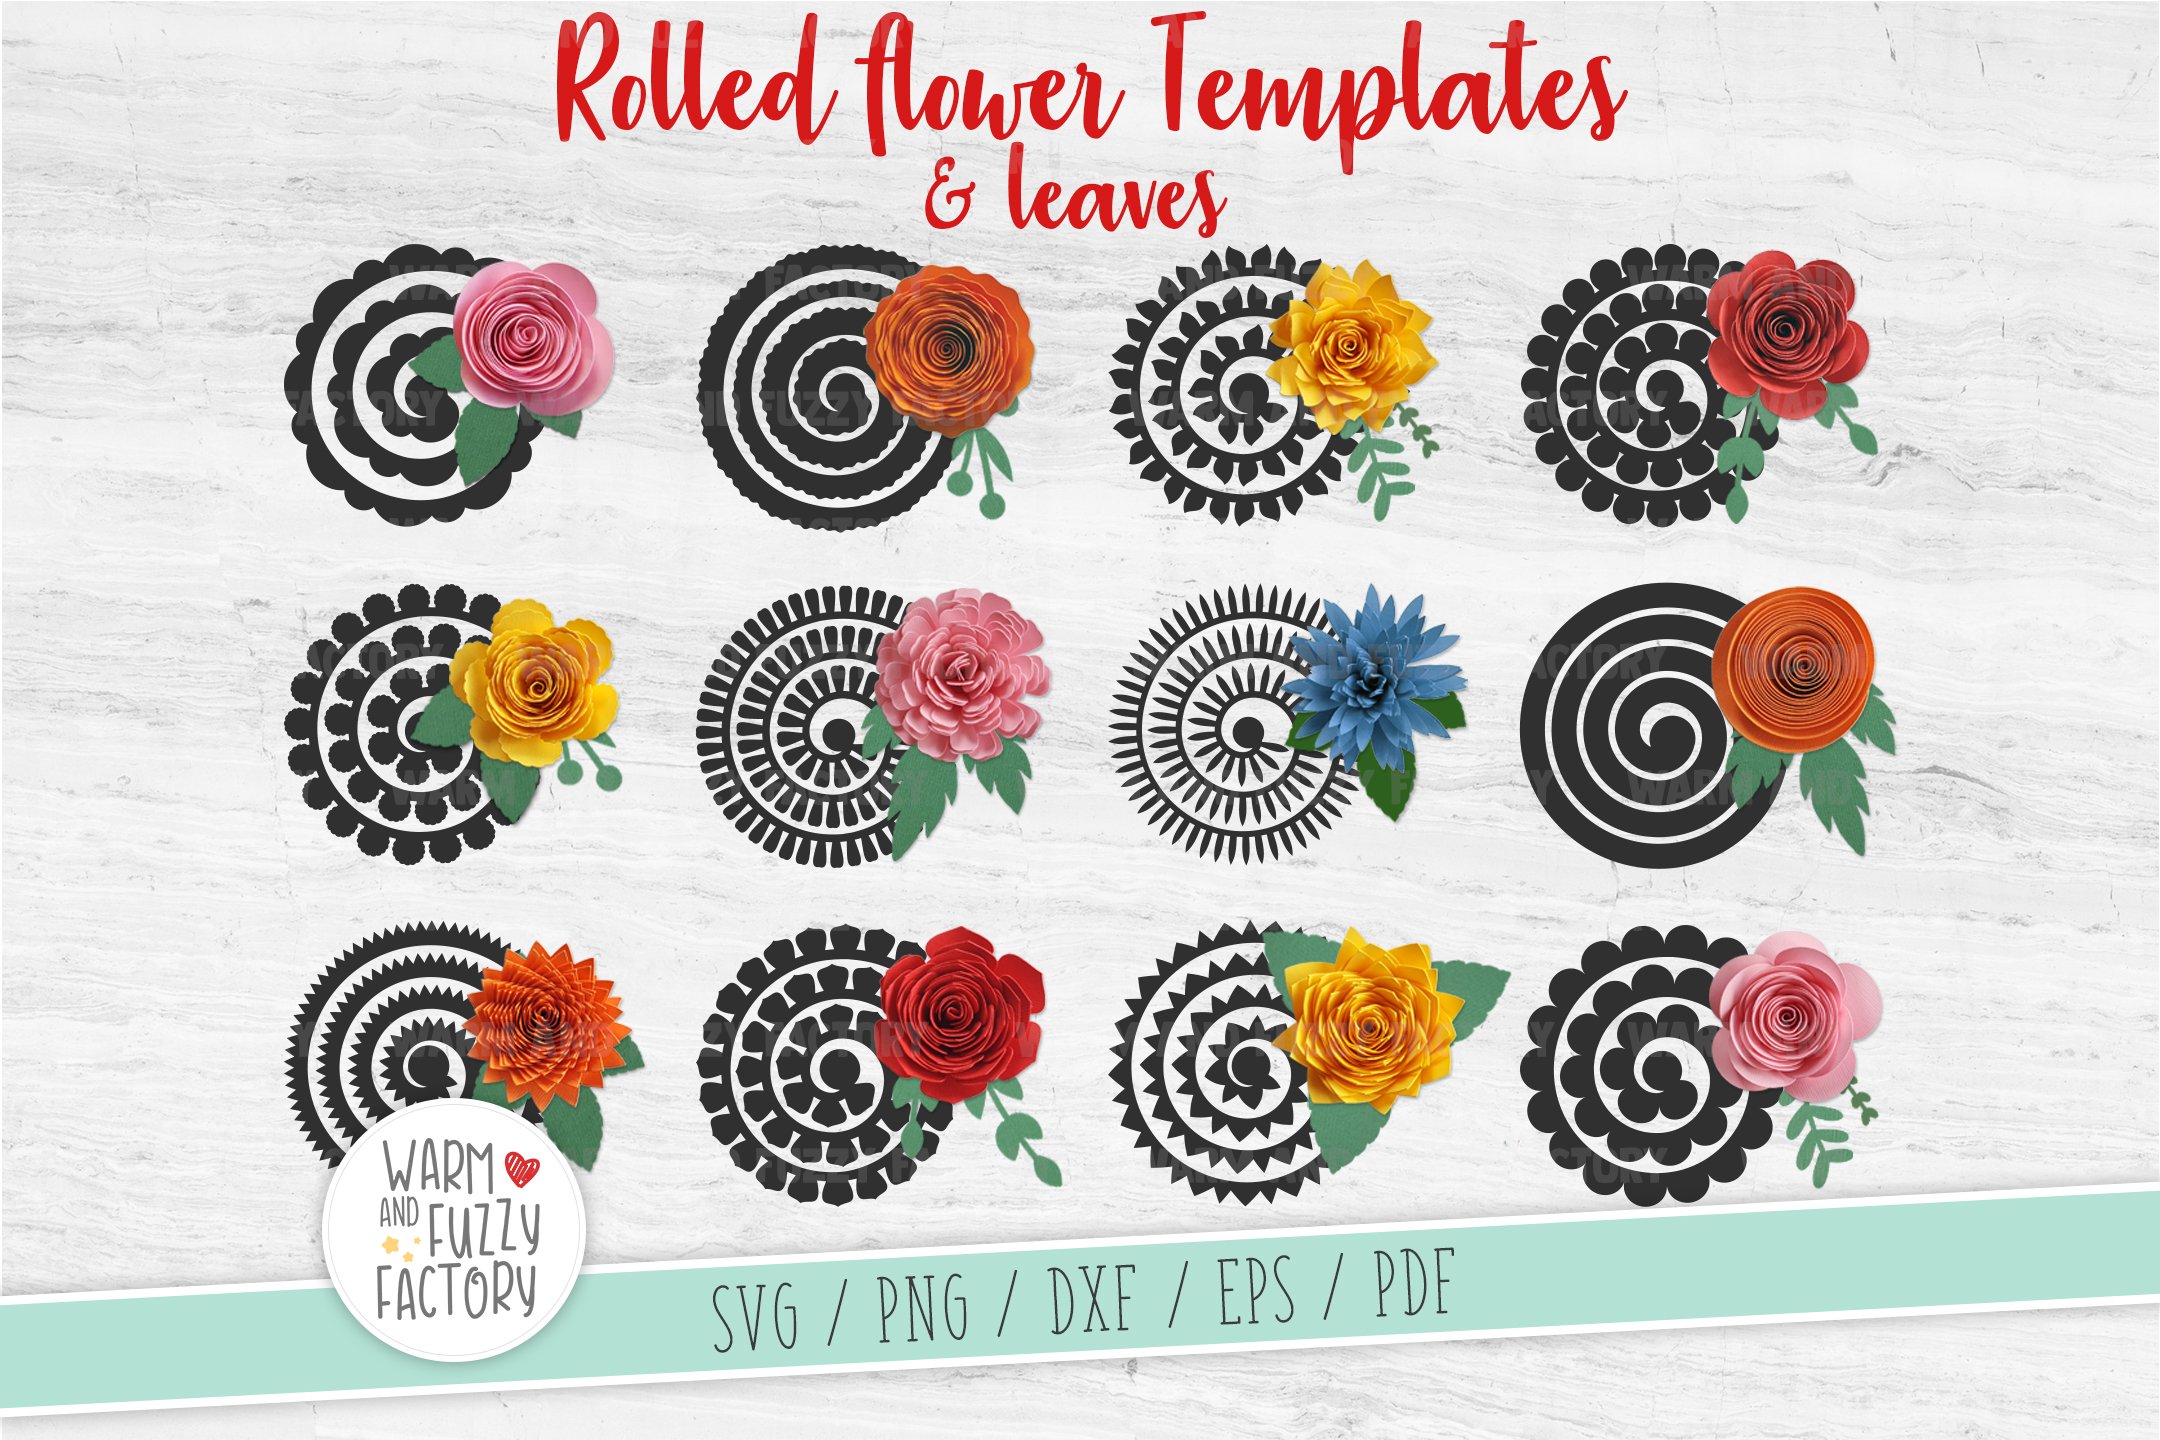 Rolled flowers with ornaments on the light wooden background.